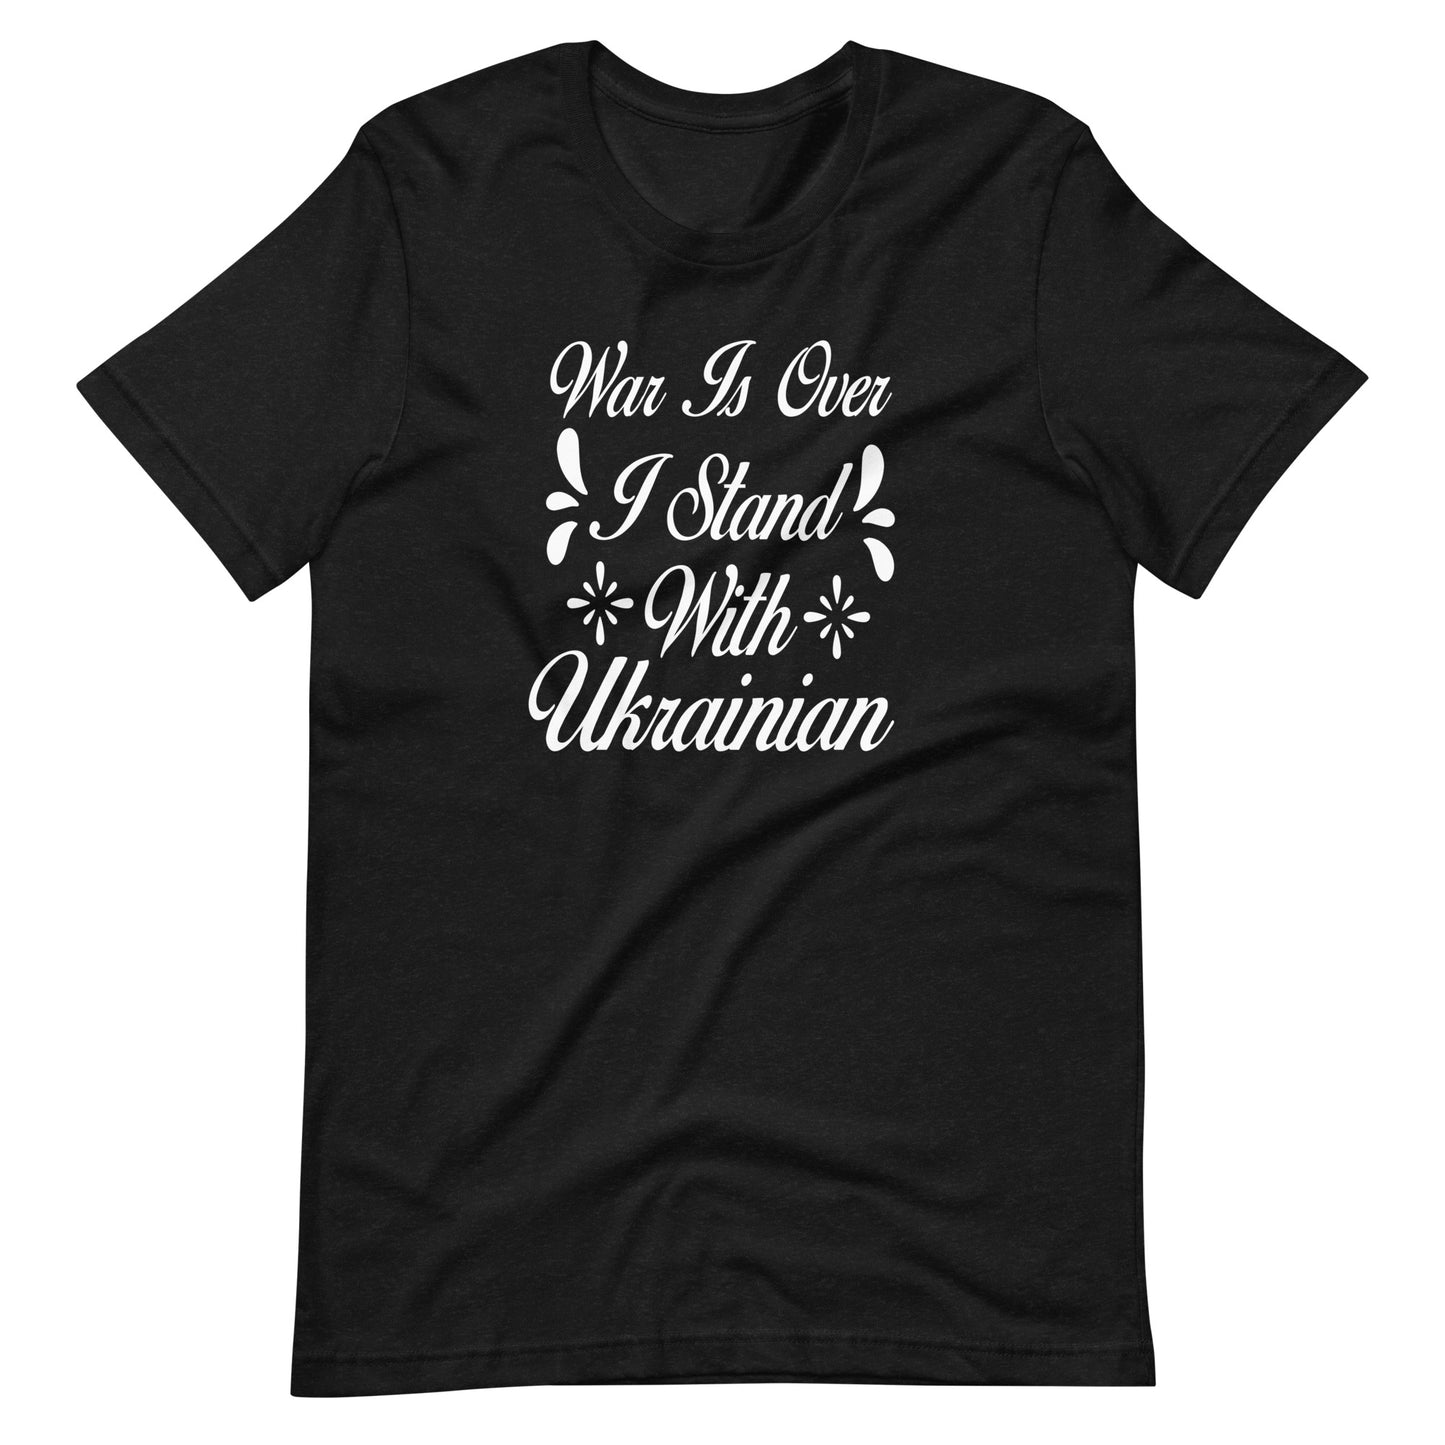 War is over i stand with Ukrainian | Unisex t-shirt